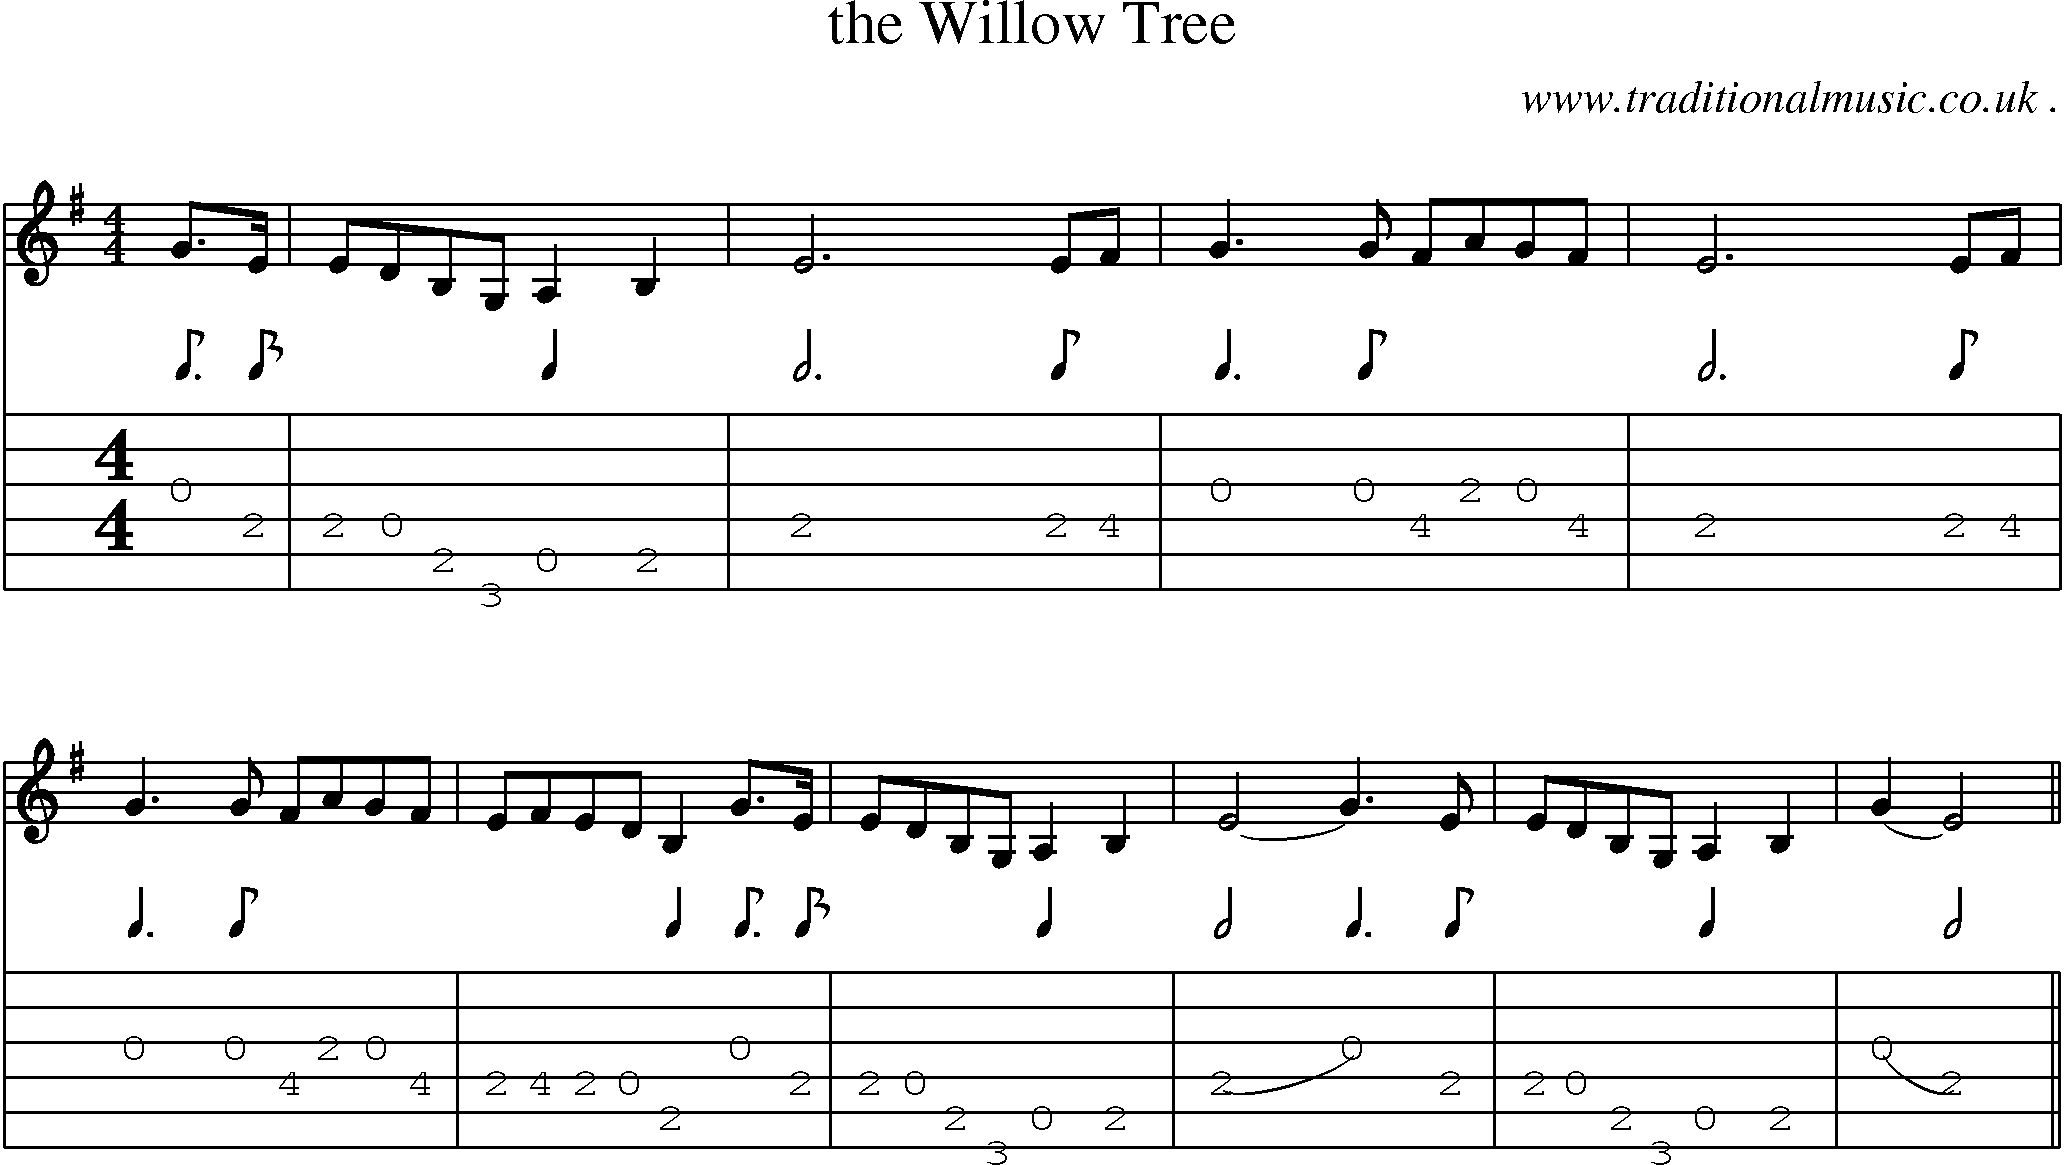 Sheet-Music and Guitar Tabs for The Willow Tree